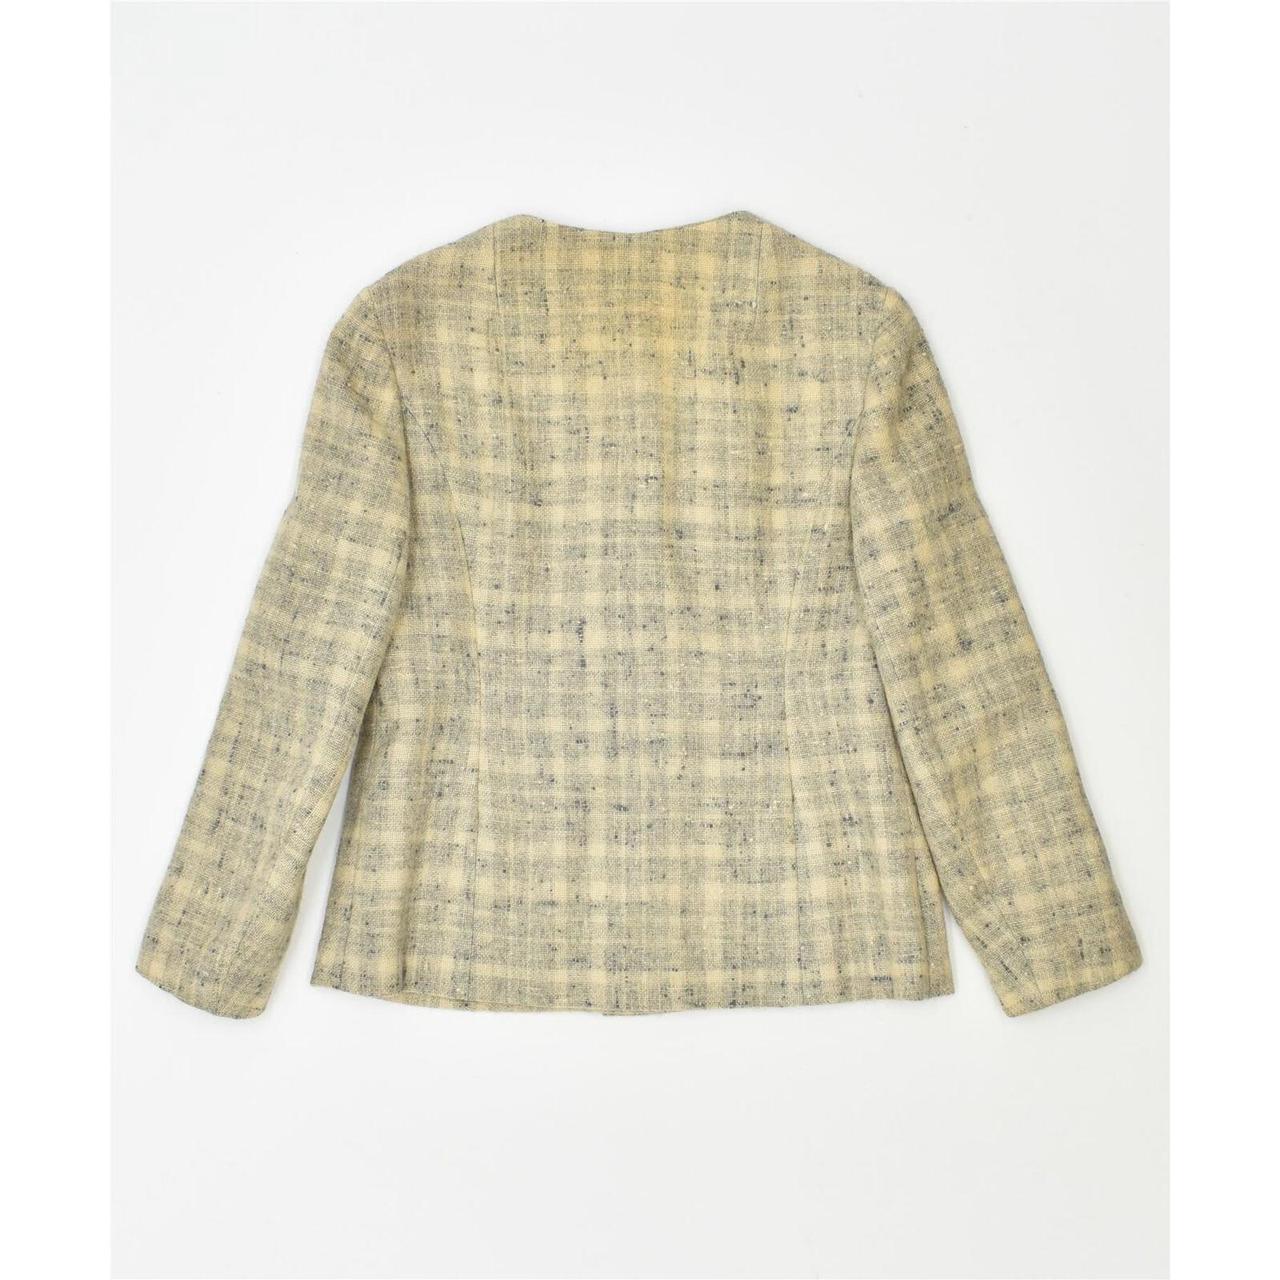 Product Image 2 - ROSIER Womens 4 Button Blazer